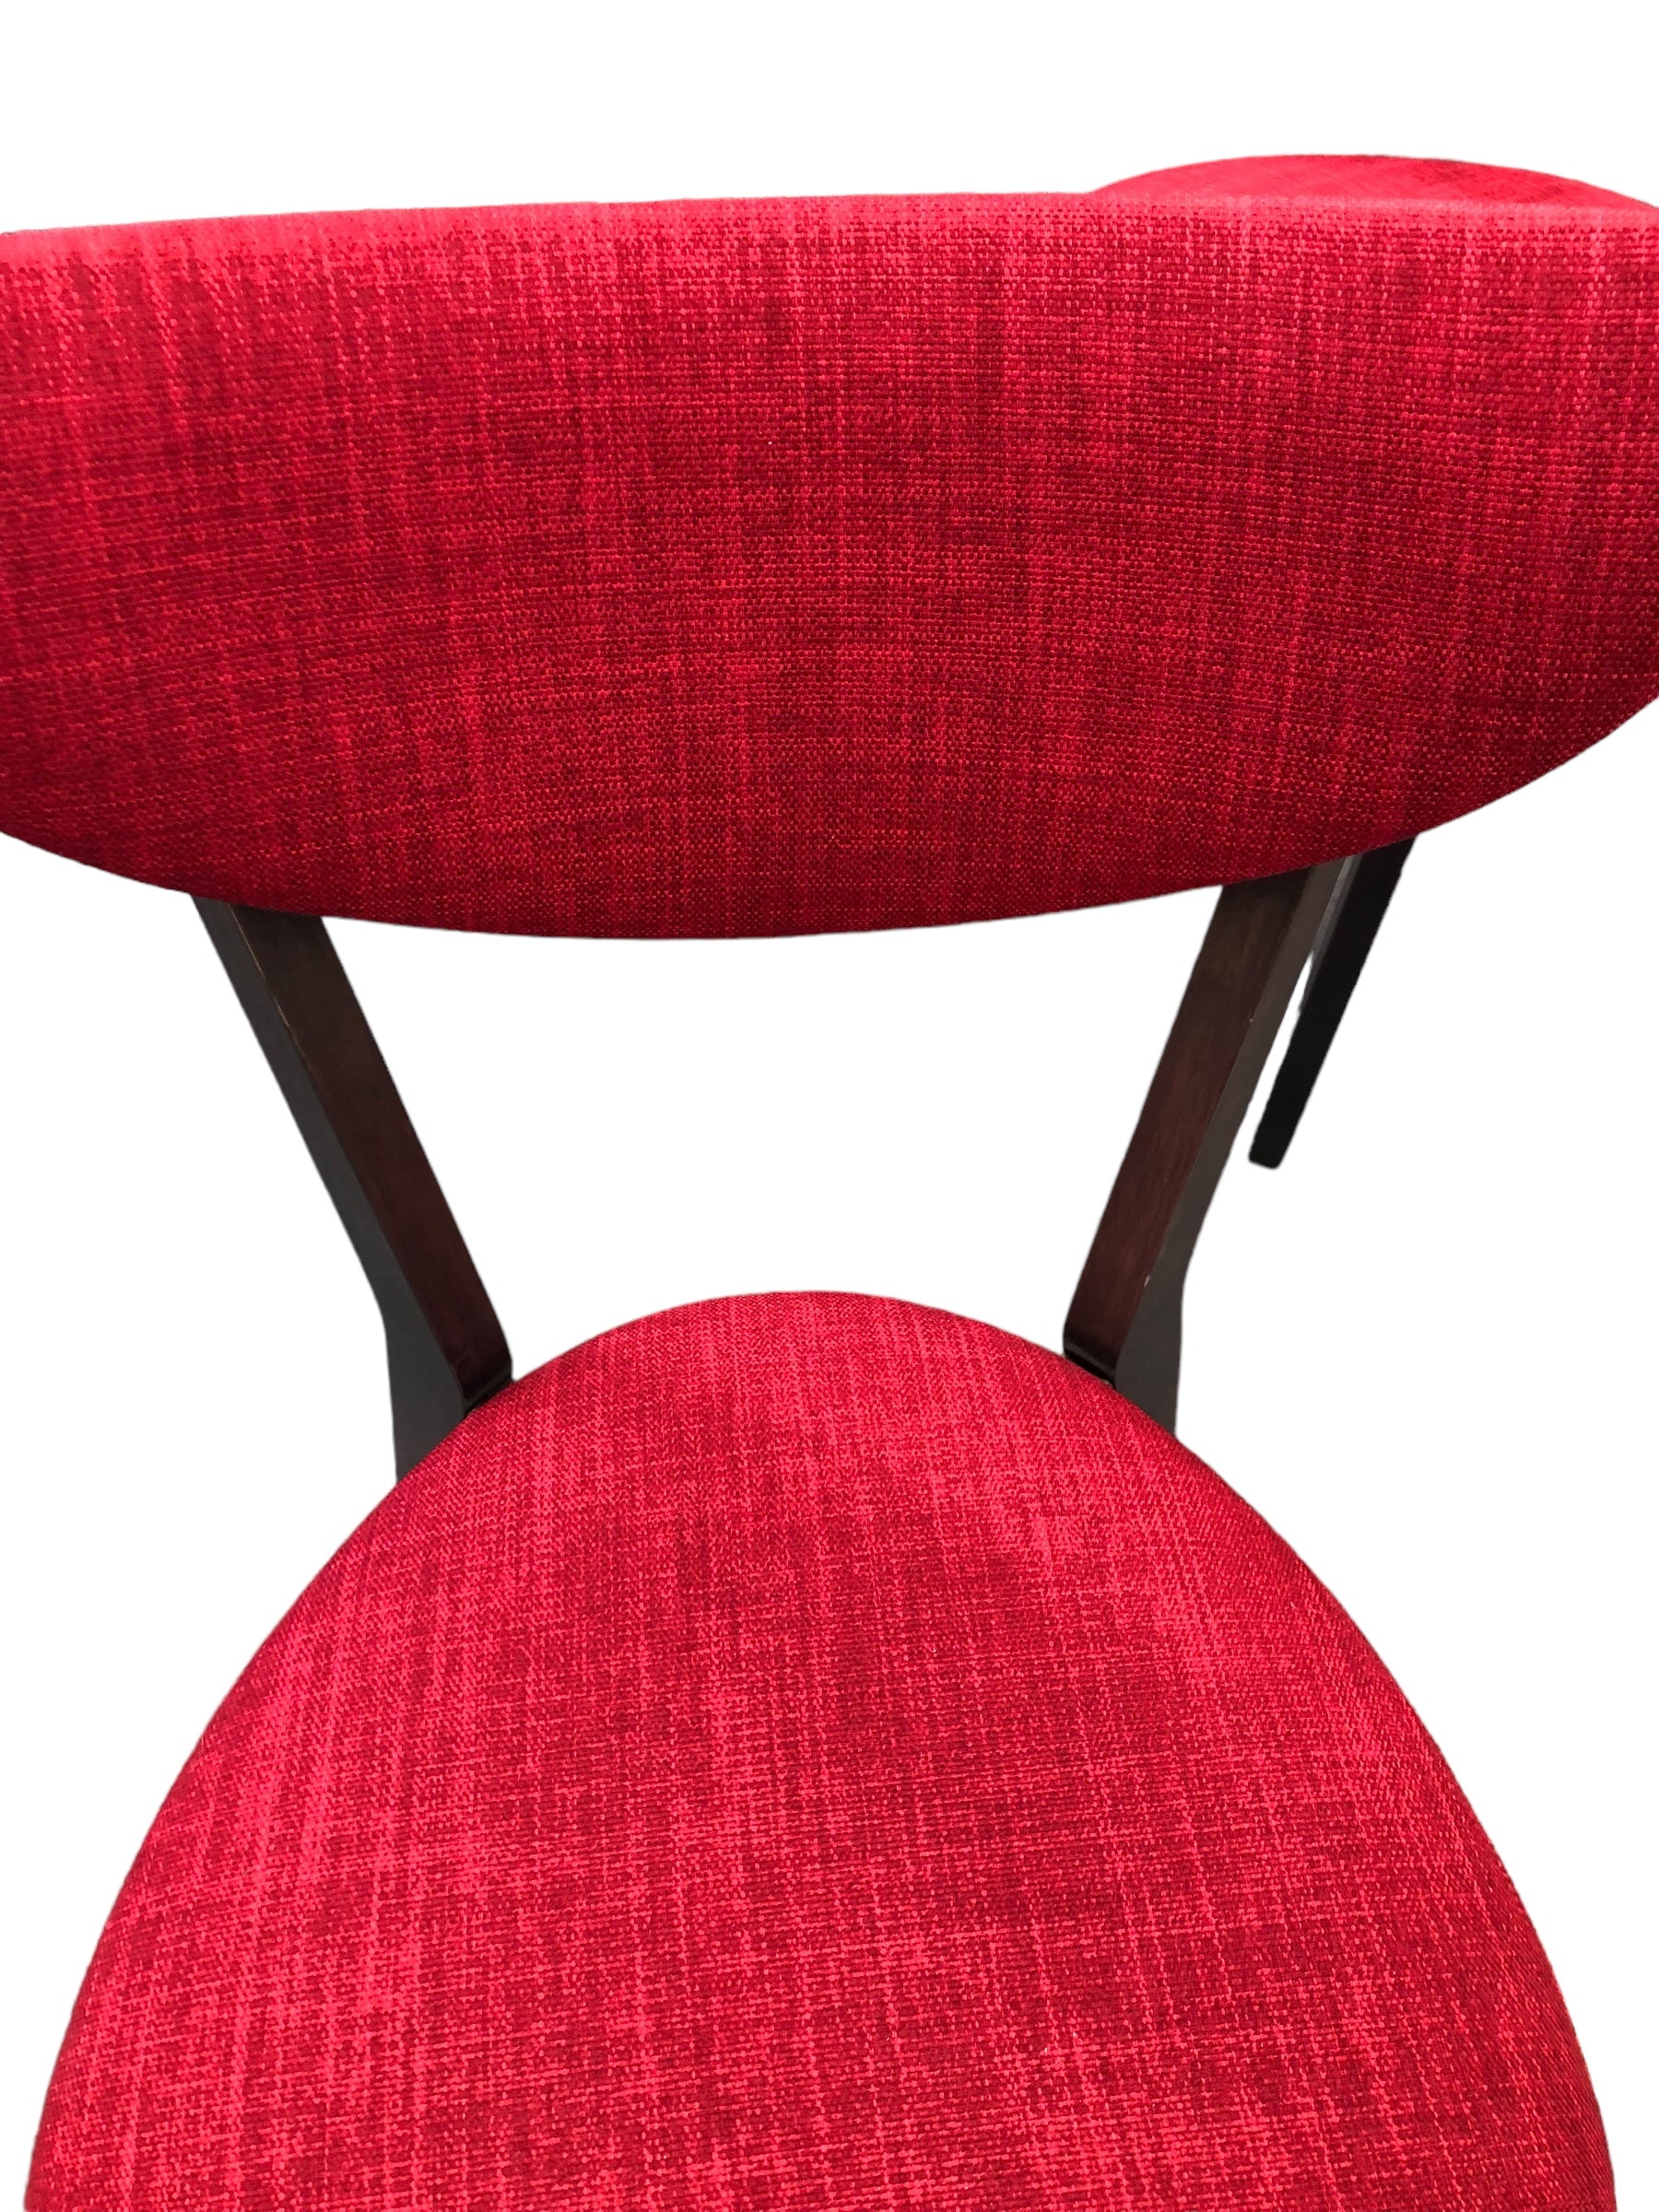 Red Fabric and wood Chairs